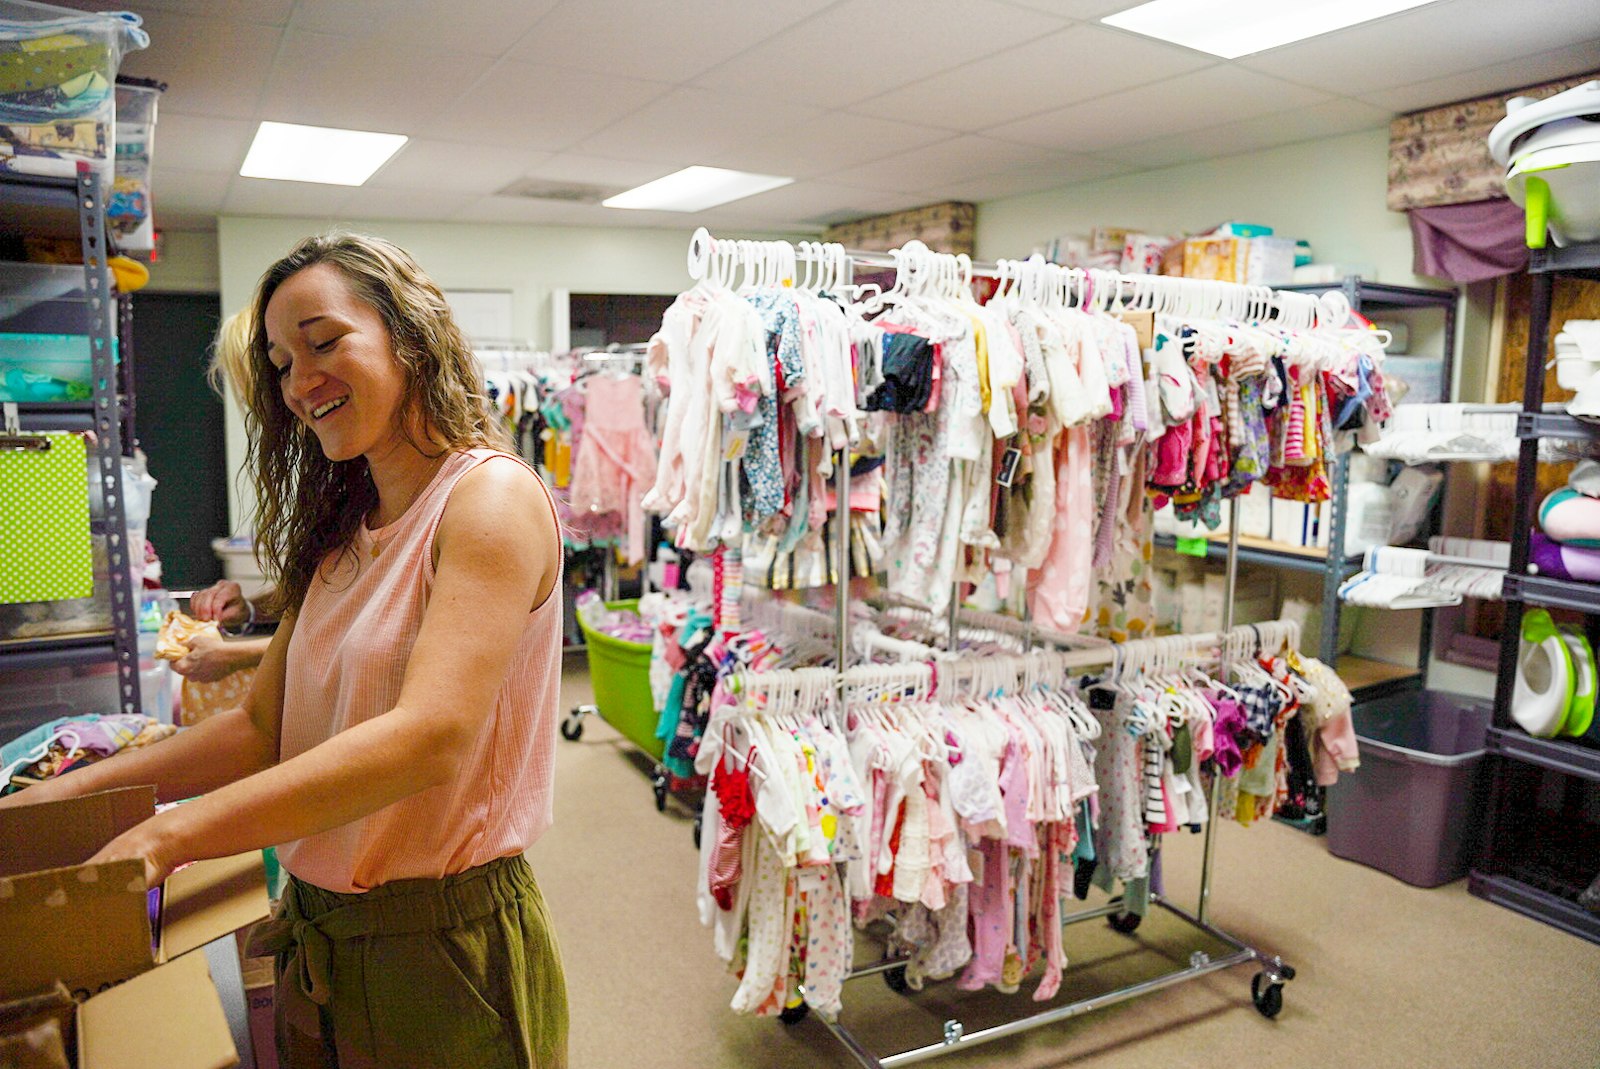 Emily Fitzgerald, a parishioner at St. Thecla Parish in Clinton Township, helps out in the Lennon Pregnancy Center's clothing closet July 21. Fitzgerald has been volunteering at the center for almost a year, and wasn't deterred by the June 20 attack.